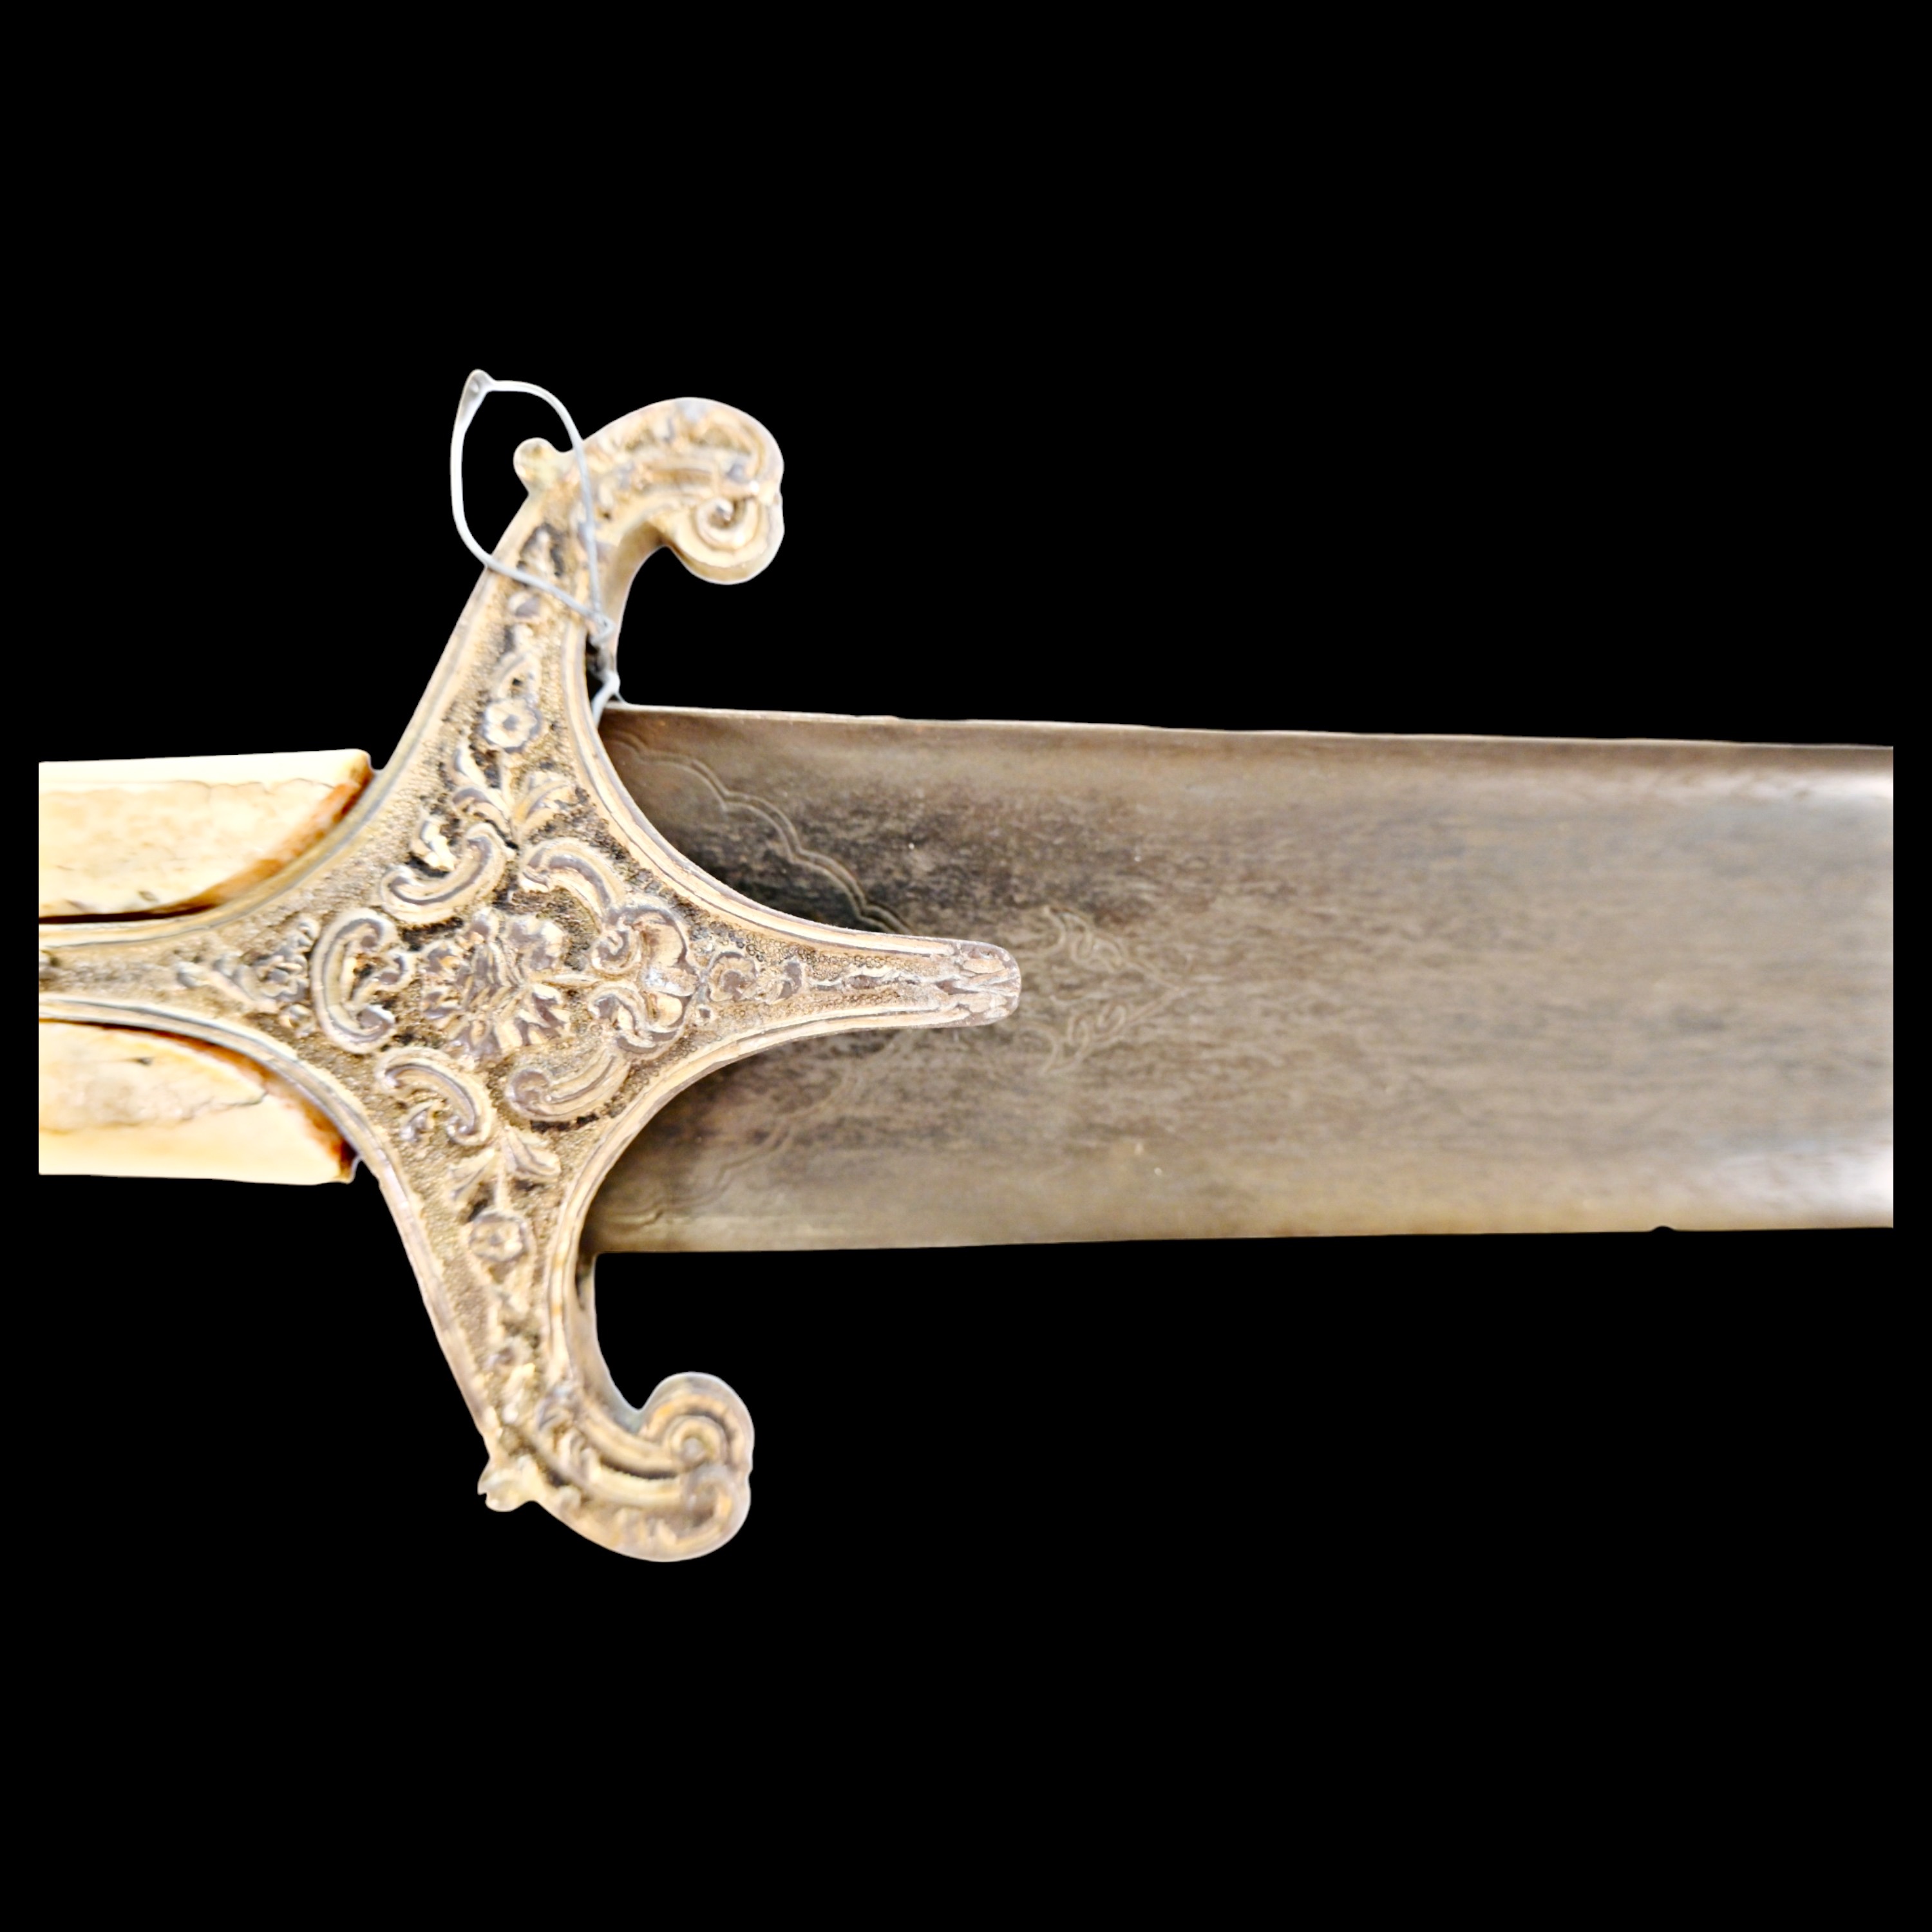 Rare Ottoman saber KARABELA, wootz blade, silver with the tugra of Sultan Ahmed III, early 18th C. - Image 24 of 27